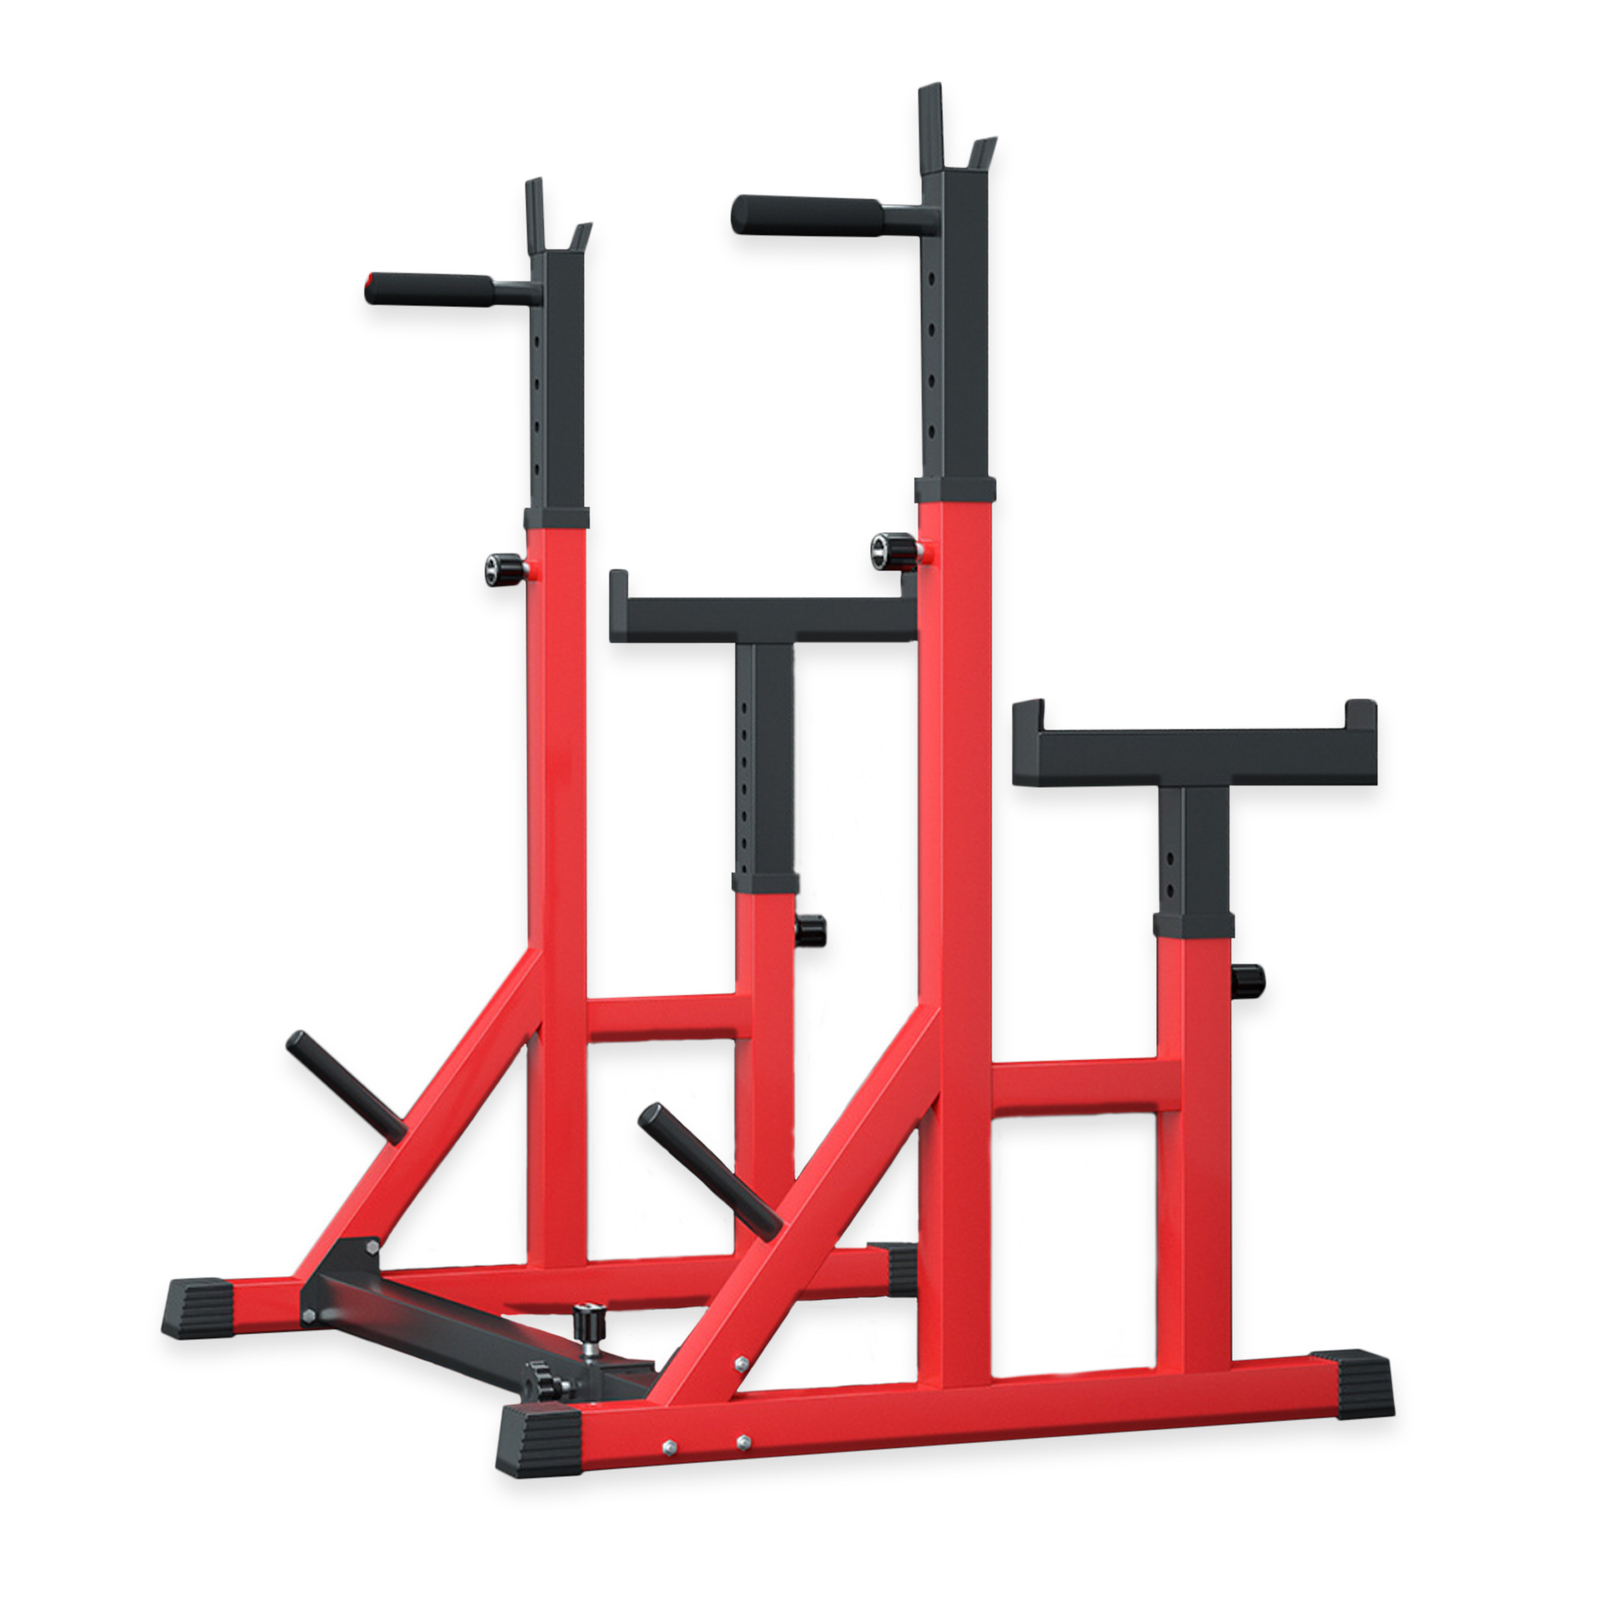 FitnessLab Adjustable Squat Rack Fitness Exercise Weight Lifting Home Gym Barbell Stand